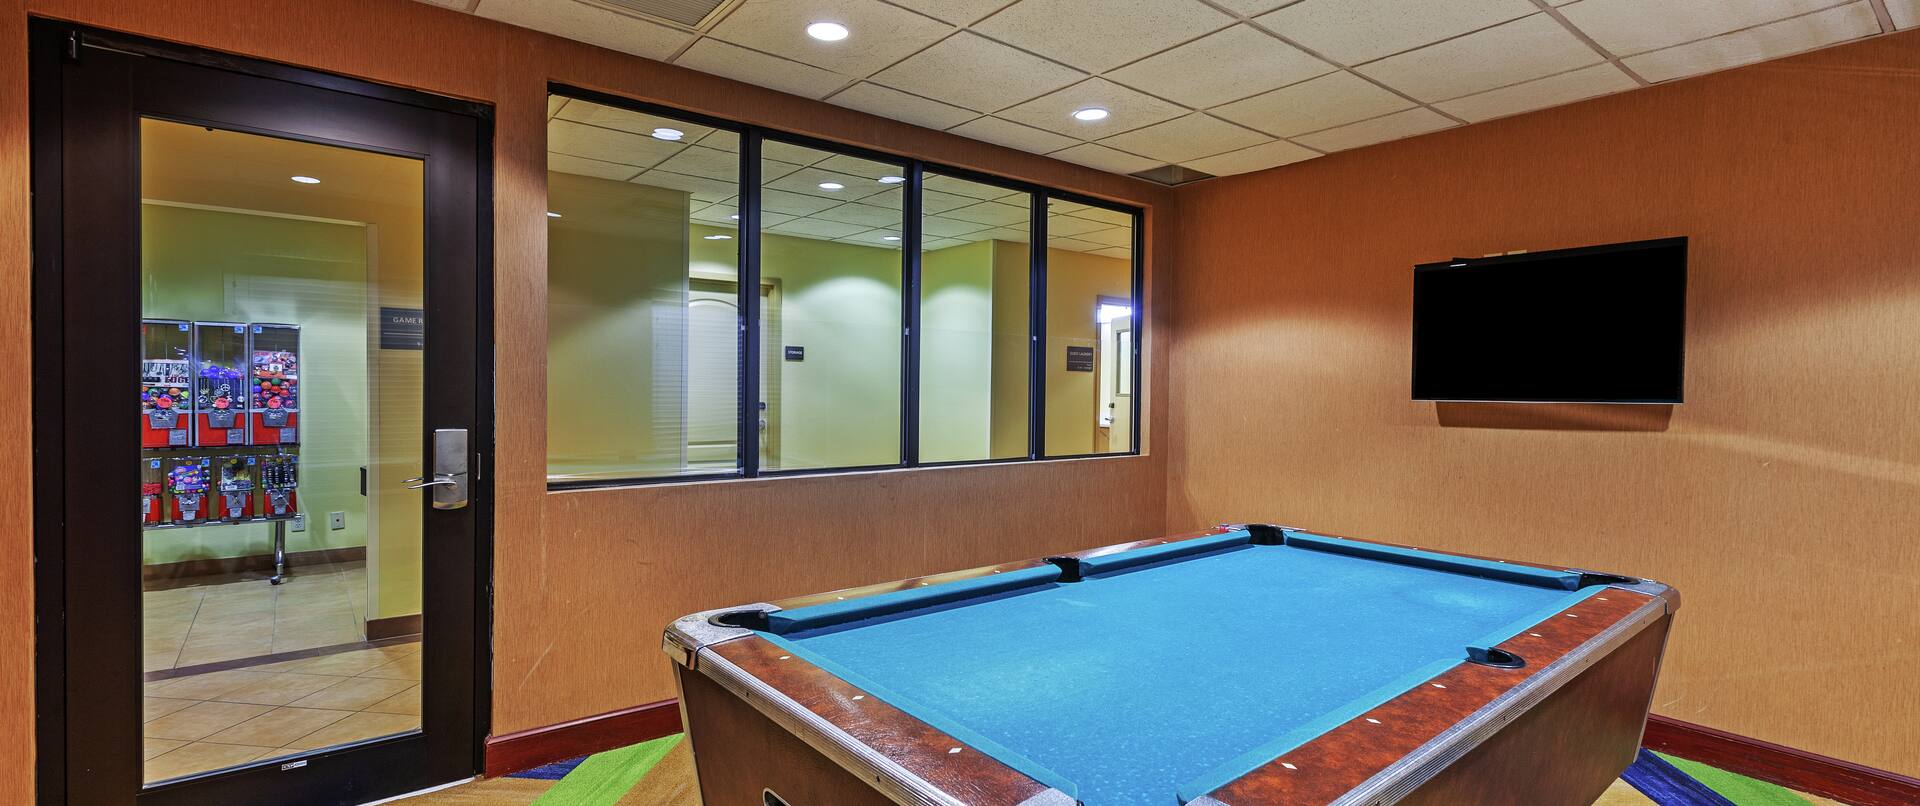 Game Room With Billiard Area